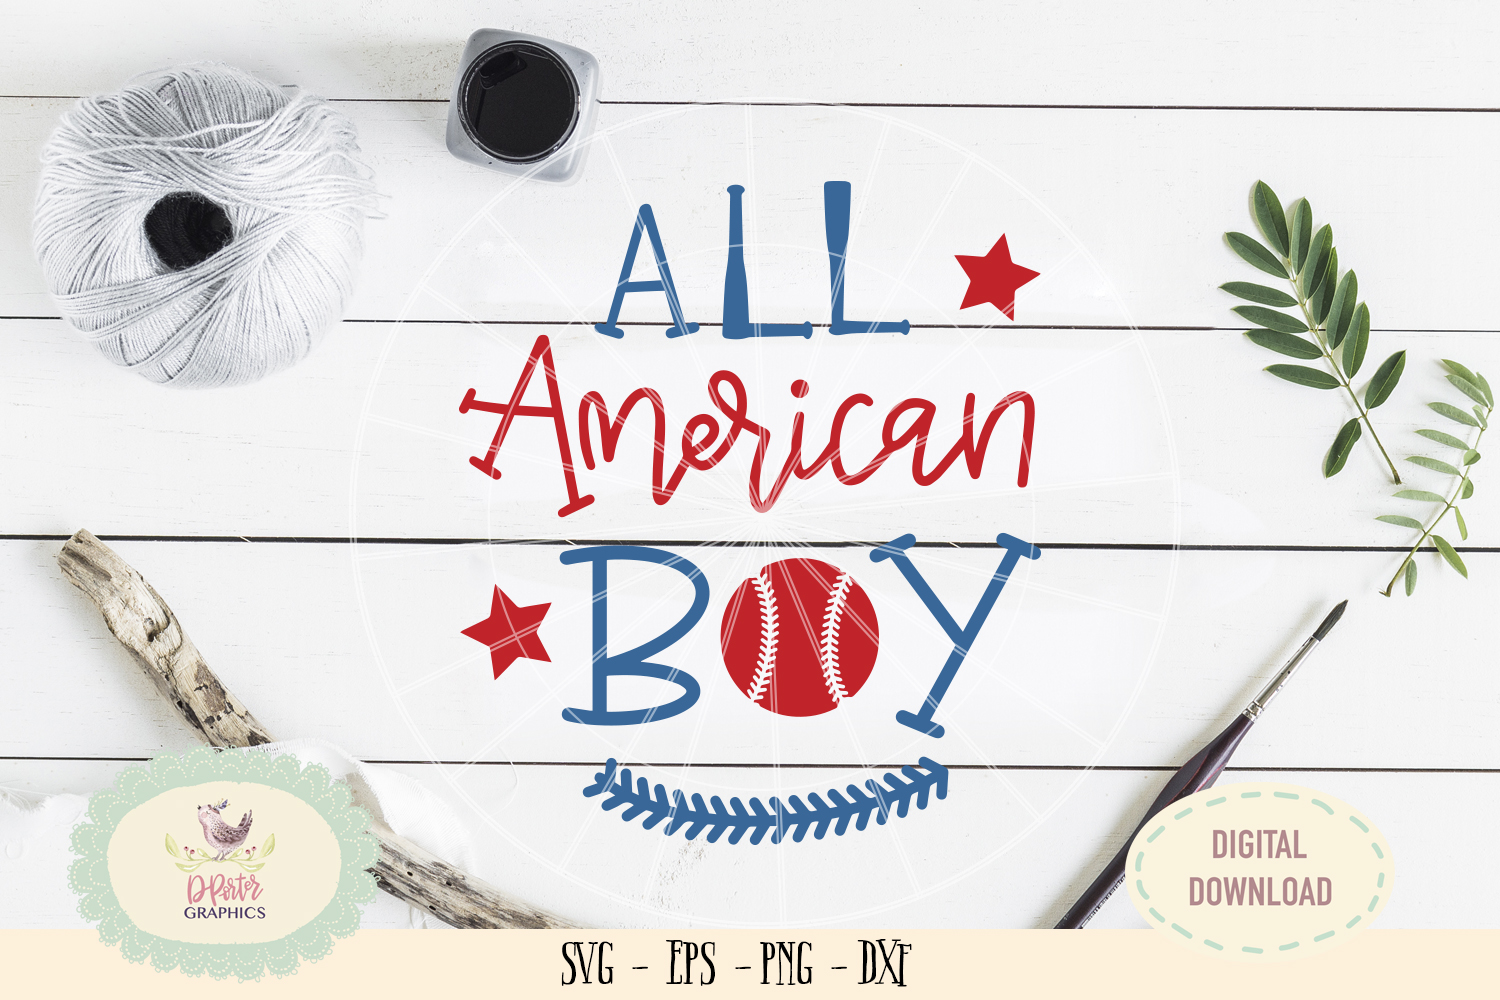 All American boy baseball SVG cut file, 4th of july example image 1.